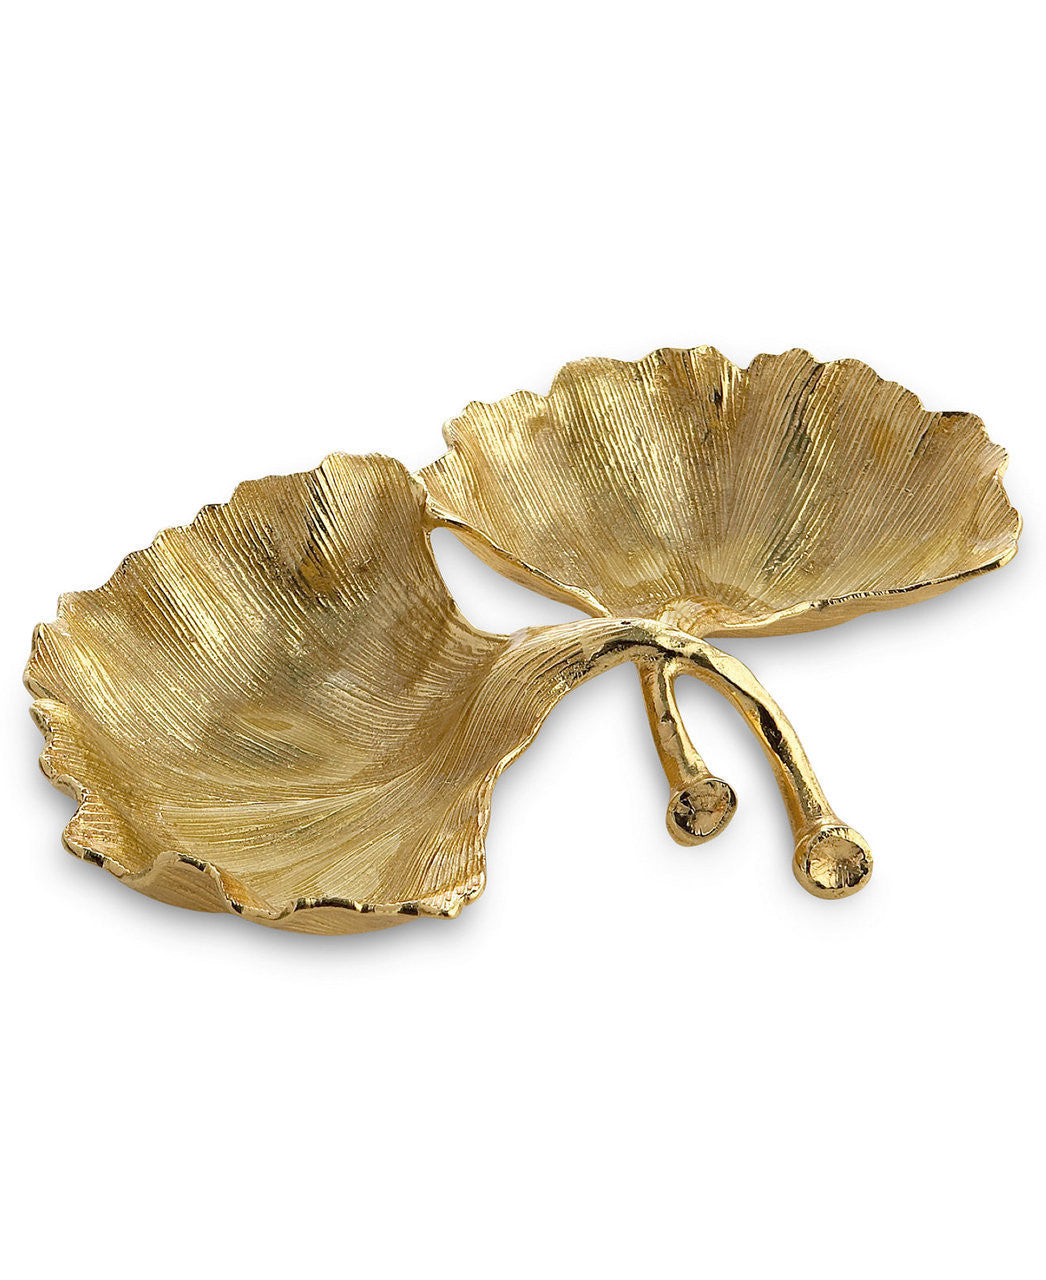 New Leaves Ginkgo Double Compartment Dish - RSVP Style